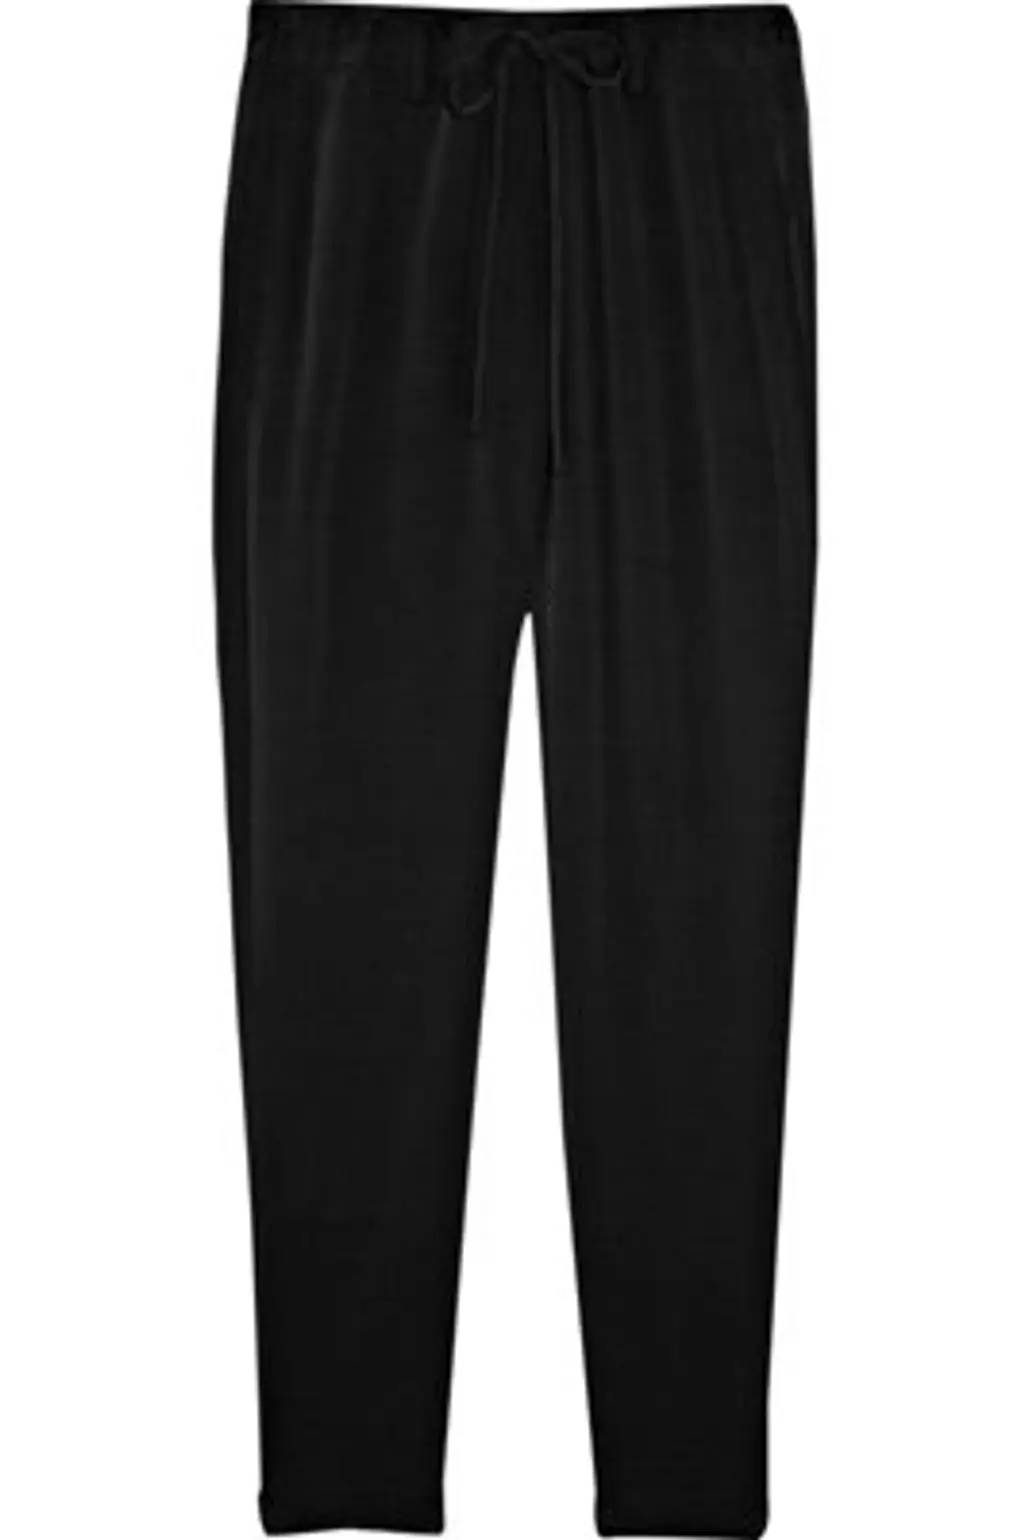 Theory Cropped Stretch Silk Pants